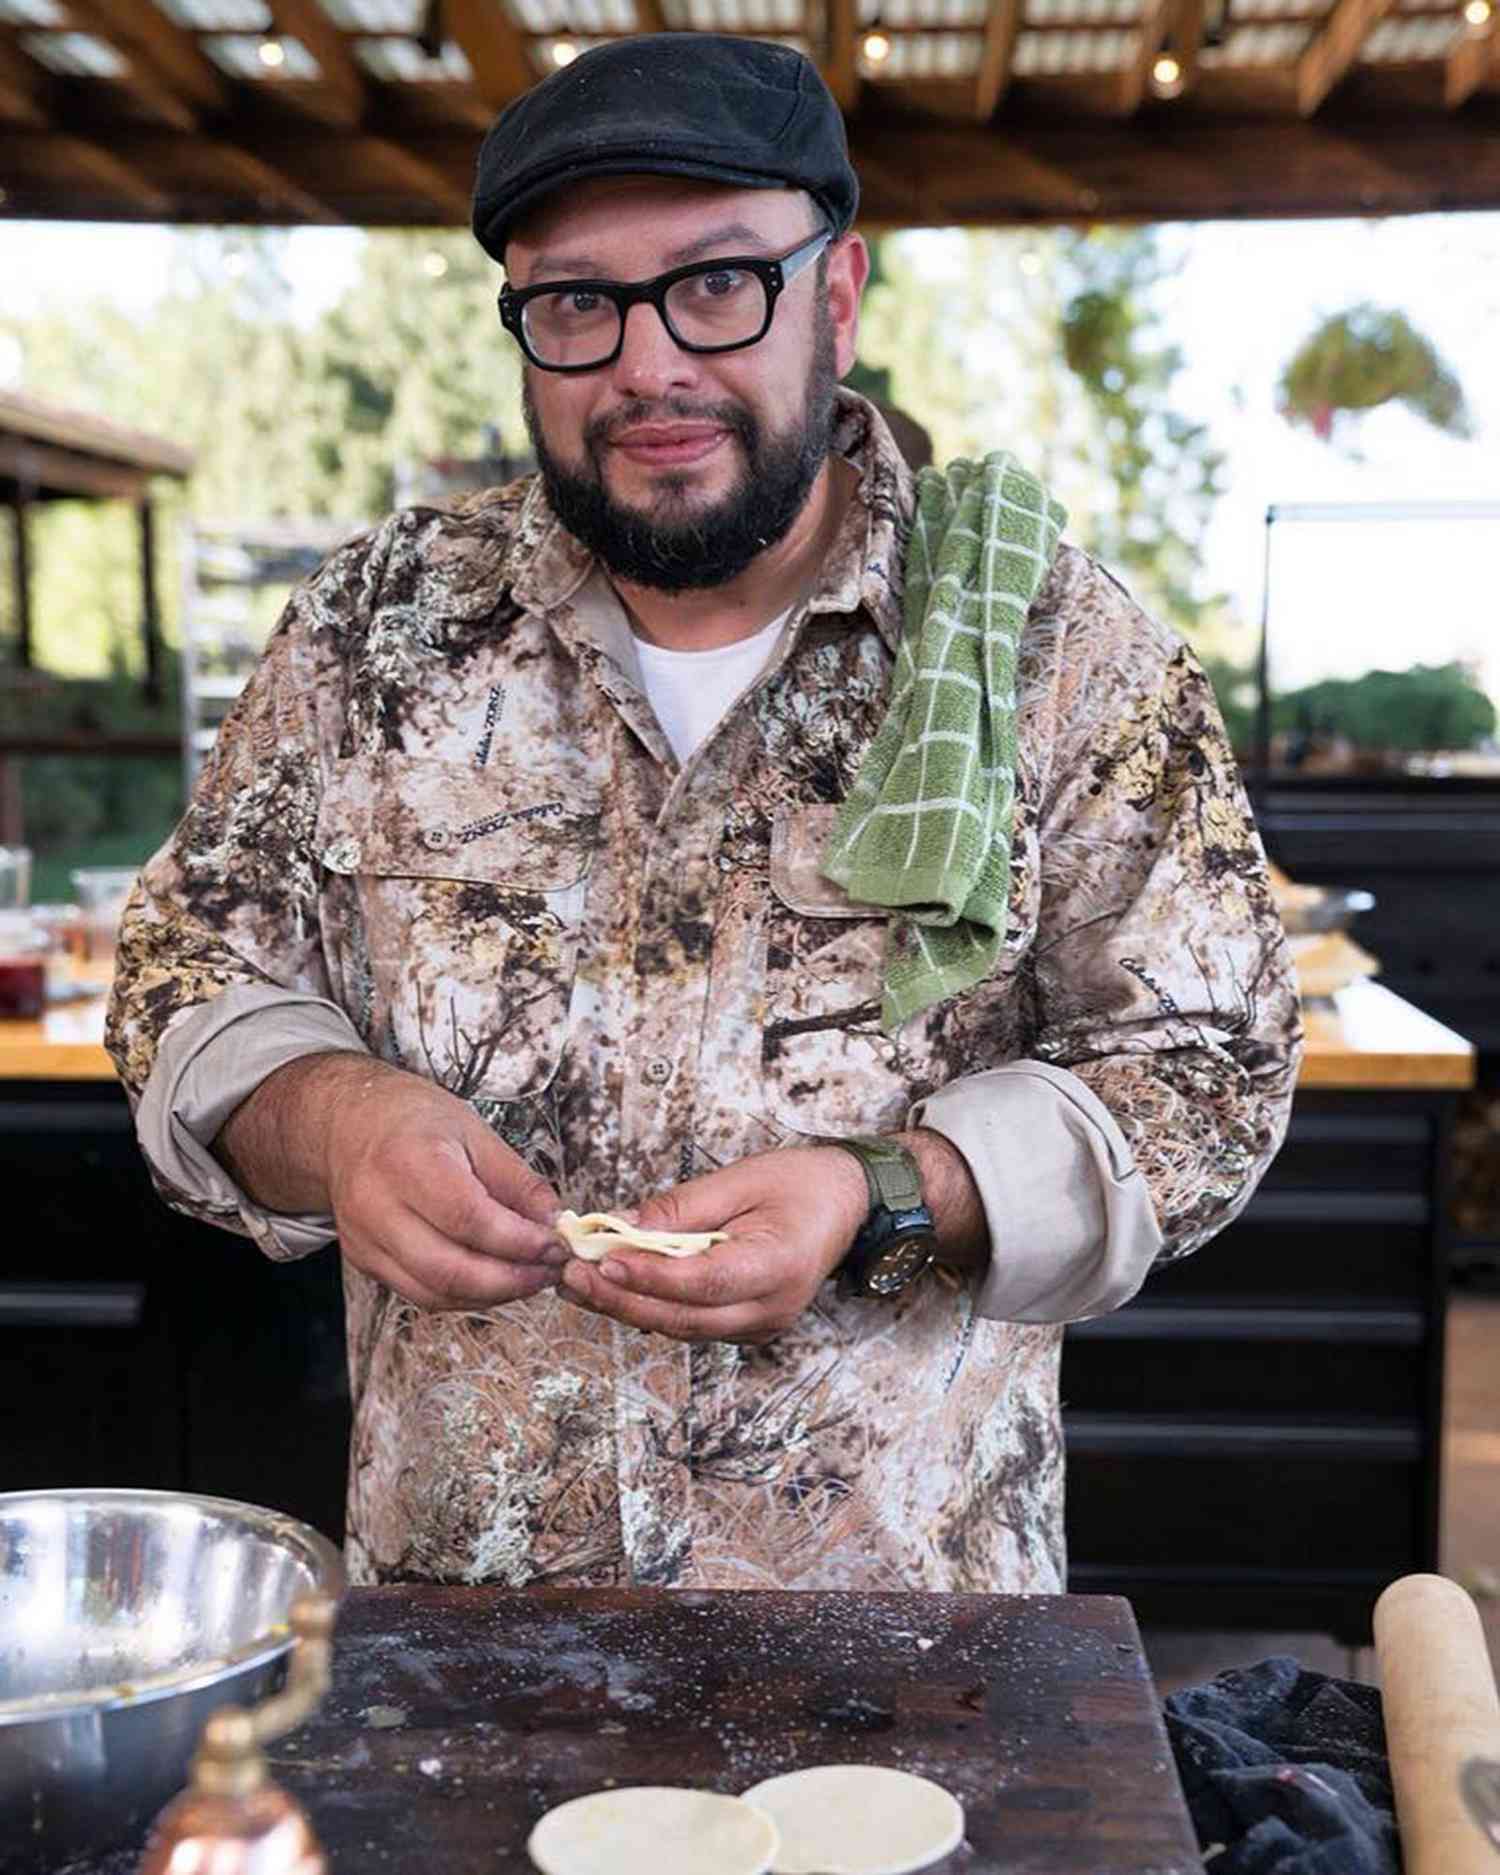 <p>The beloved Food Network star died on Sept. 21 at 44. His official cause of death has not been annouced but Ruiz's family confirmed the sad news by creating the Twitter account, @wemisscarlruiz.</p>
                            <p>"He was all about great times, great food and great friends," Ruiz's brother George wrote on behalf of their family. "Please remember his laugh and his wit."</p>
                            <p>Ruiz's sudden death has prompted many celebrities from the food world to come forward and share their favorite memories of the chef.</p>
                            <p>Guy Fieri: "I'm heartbroken that my friend chef Carl Ruiz is gone. I have no words to describe what a great friend he was to me and my family. His ability to make me laugh and smile under any circumstances was only outshined by his talent as a chef."</p>
                            <p>Alex Guarnaschelli: "This man was somehow fatherly, comforting, wise, reckless, brilliant, wickedly funny &amp; unique all in 1. My life will be lonelier without him. Love you Carl. I'll make sure no one puts pineapple on pizza best I can without you here. #rip @carlruiz"</p>
                            